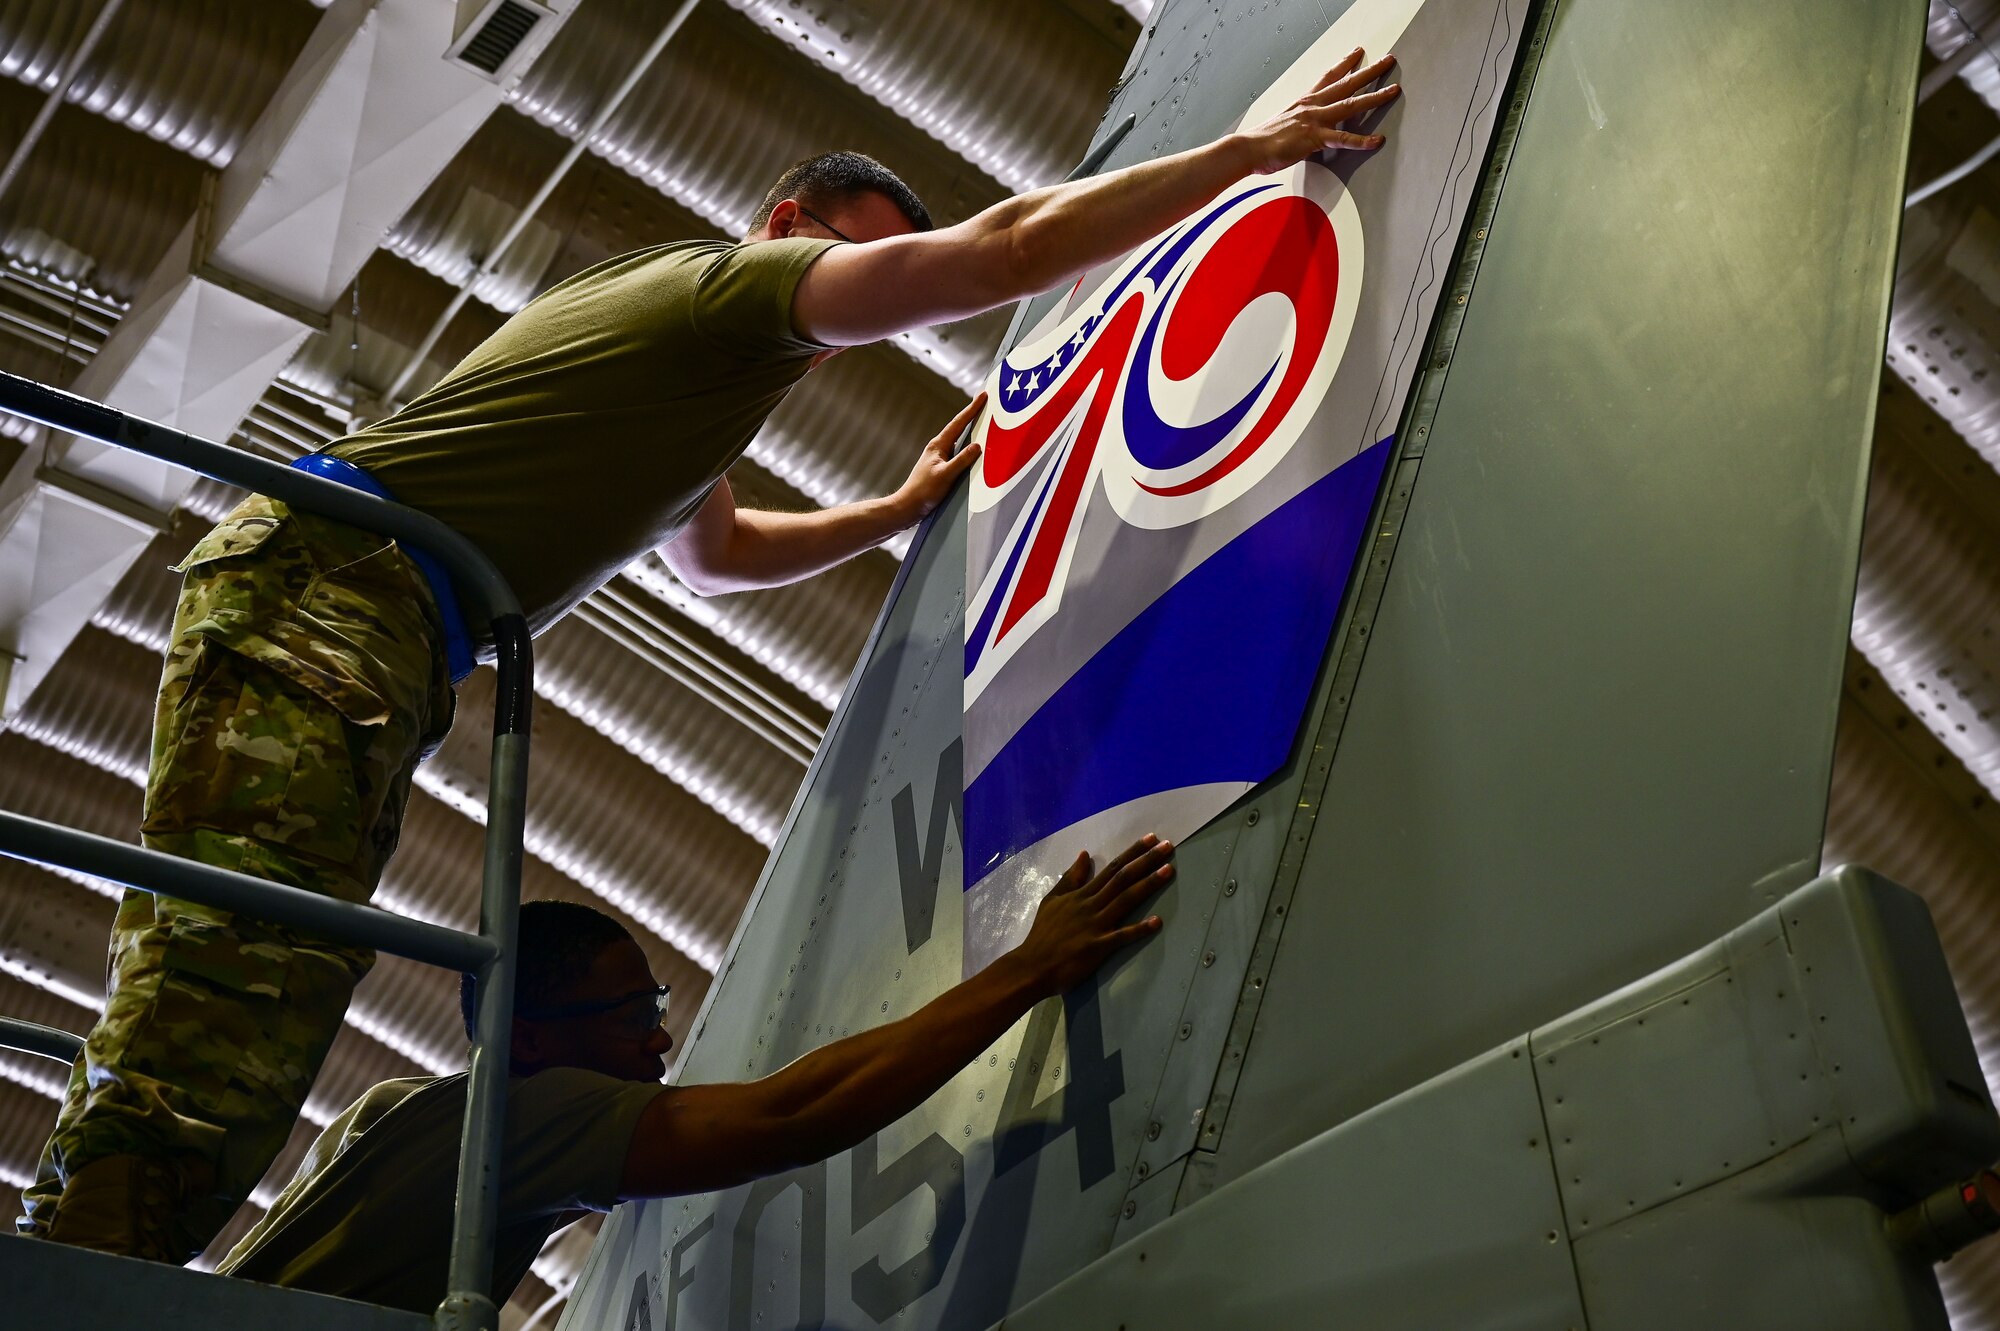 Staff Sgt. Matthew Campbell, 8th Maintenance Squadron aircraft structural maintenance craftsman (top), and Senior Airman Connor Young, 8th MXS aircraft structural maintenance, journeyman apply a 70th anniversary heritage tail flash decal at Osan Air Base, Republic of Korea, May 1, 2023. The decal comes in eight pieces, four for each side of the aircraft, and must be measured, leveled and applied securely on the aircraft. (U.S. Air Force photo by Tech. Sgt. Timothy Dischinat)